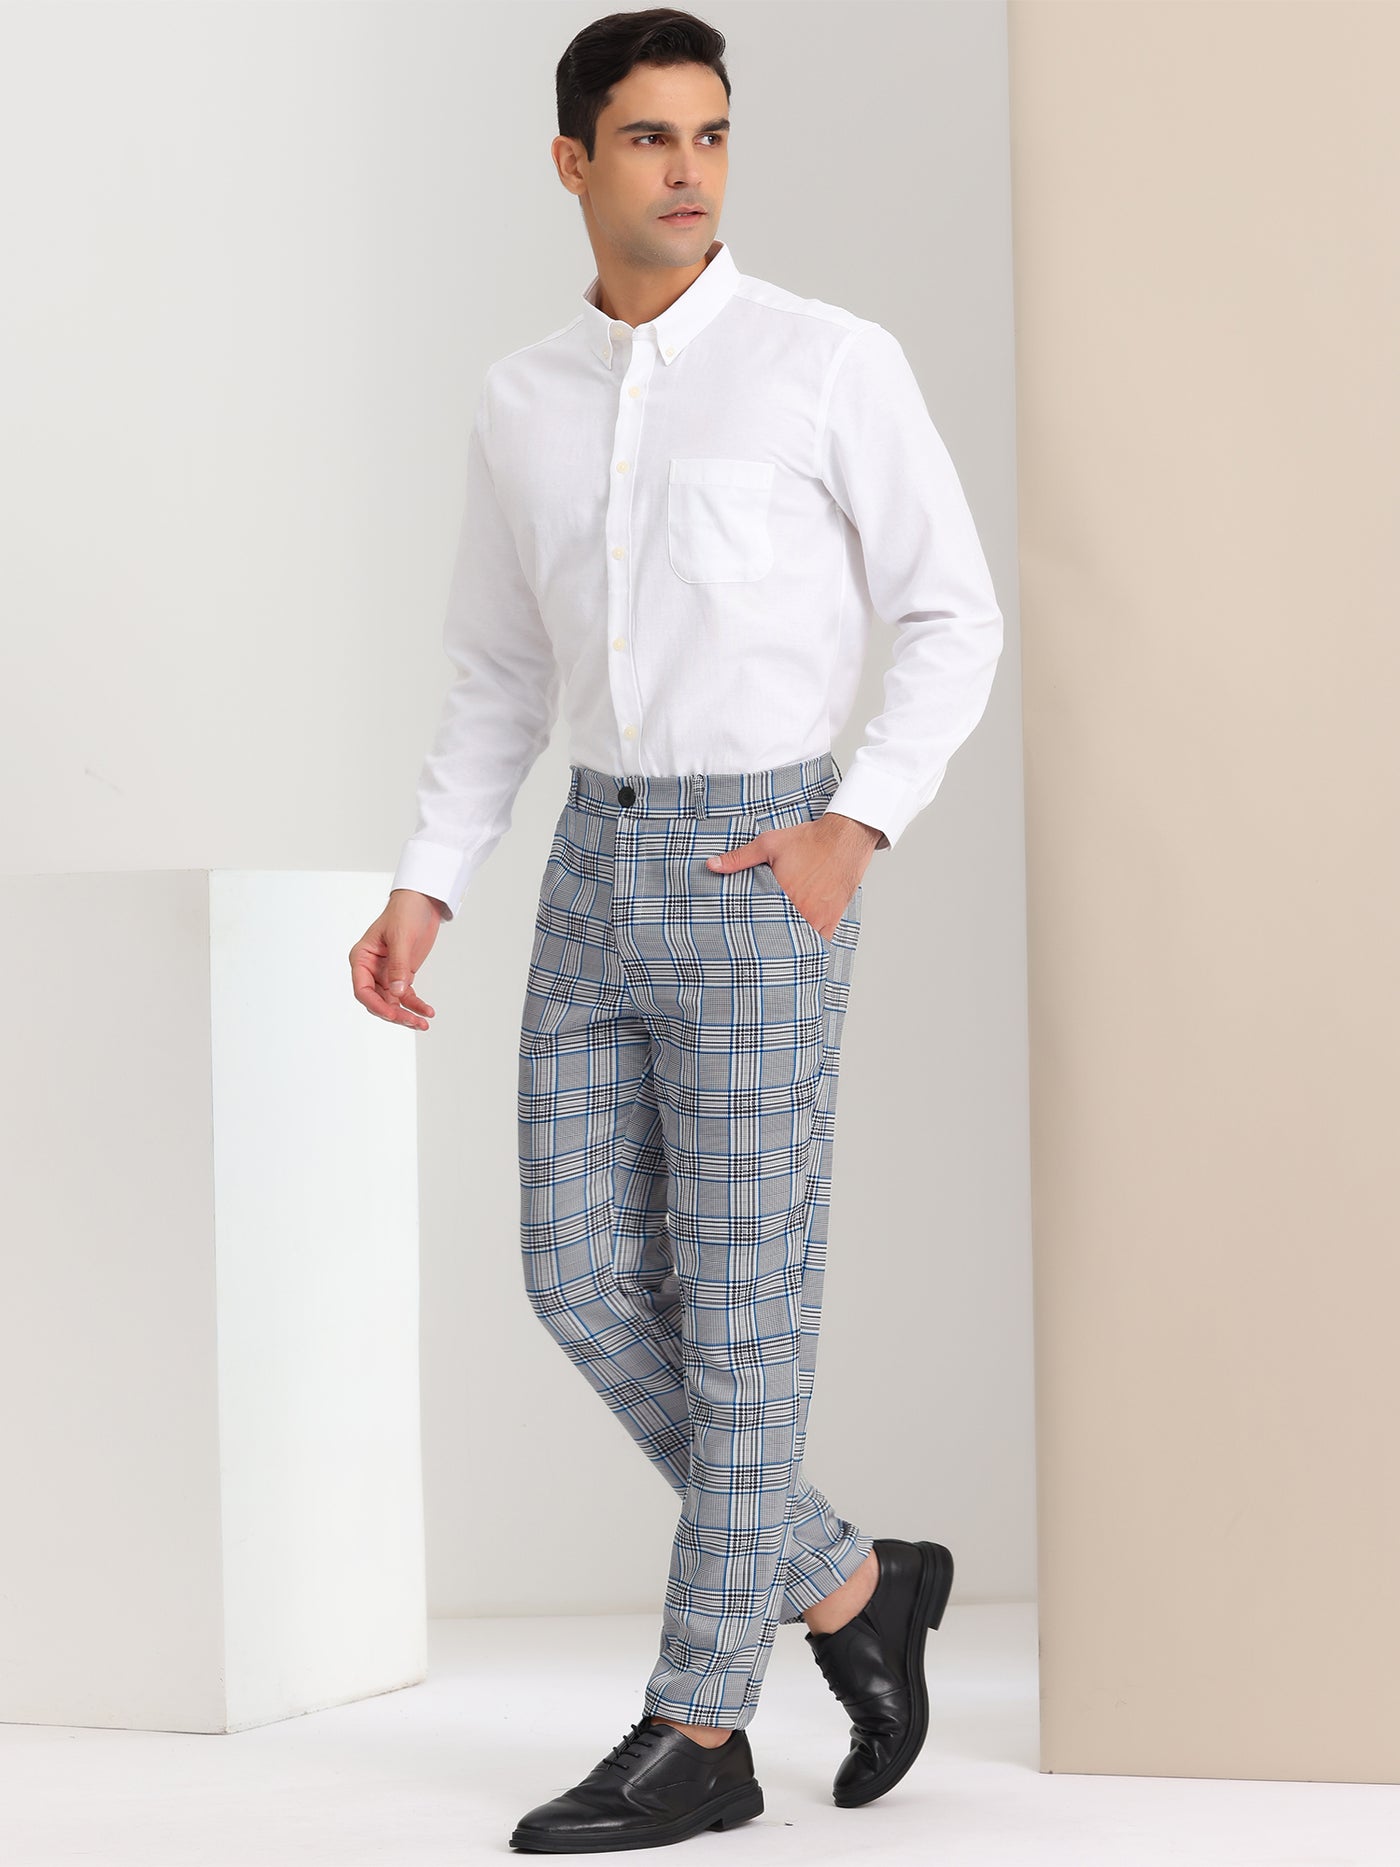 Bublédon Men's Classic Plaid Dress Pants Flat Front Checked Office Prom Trousers